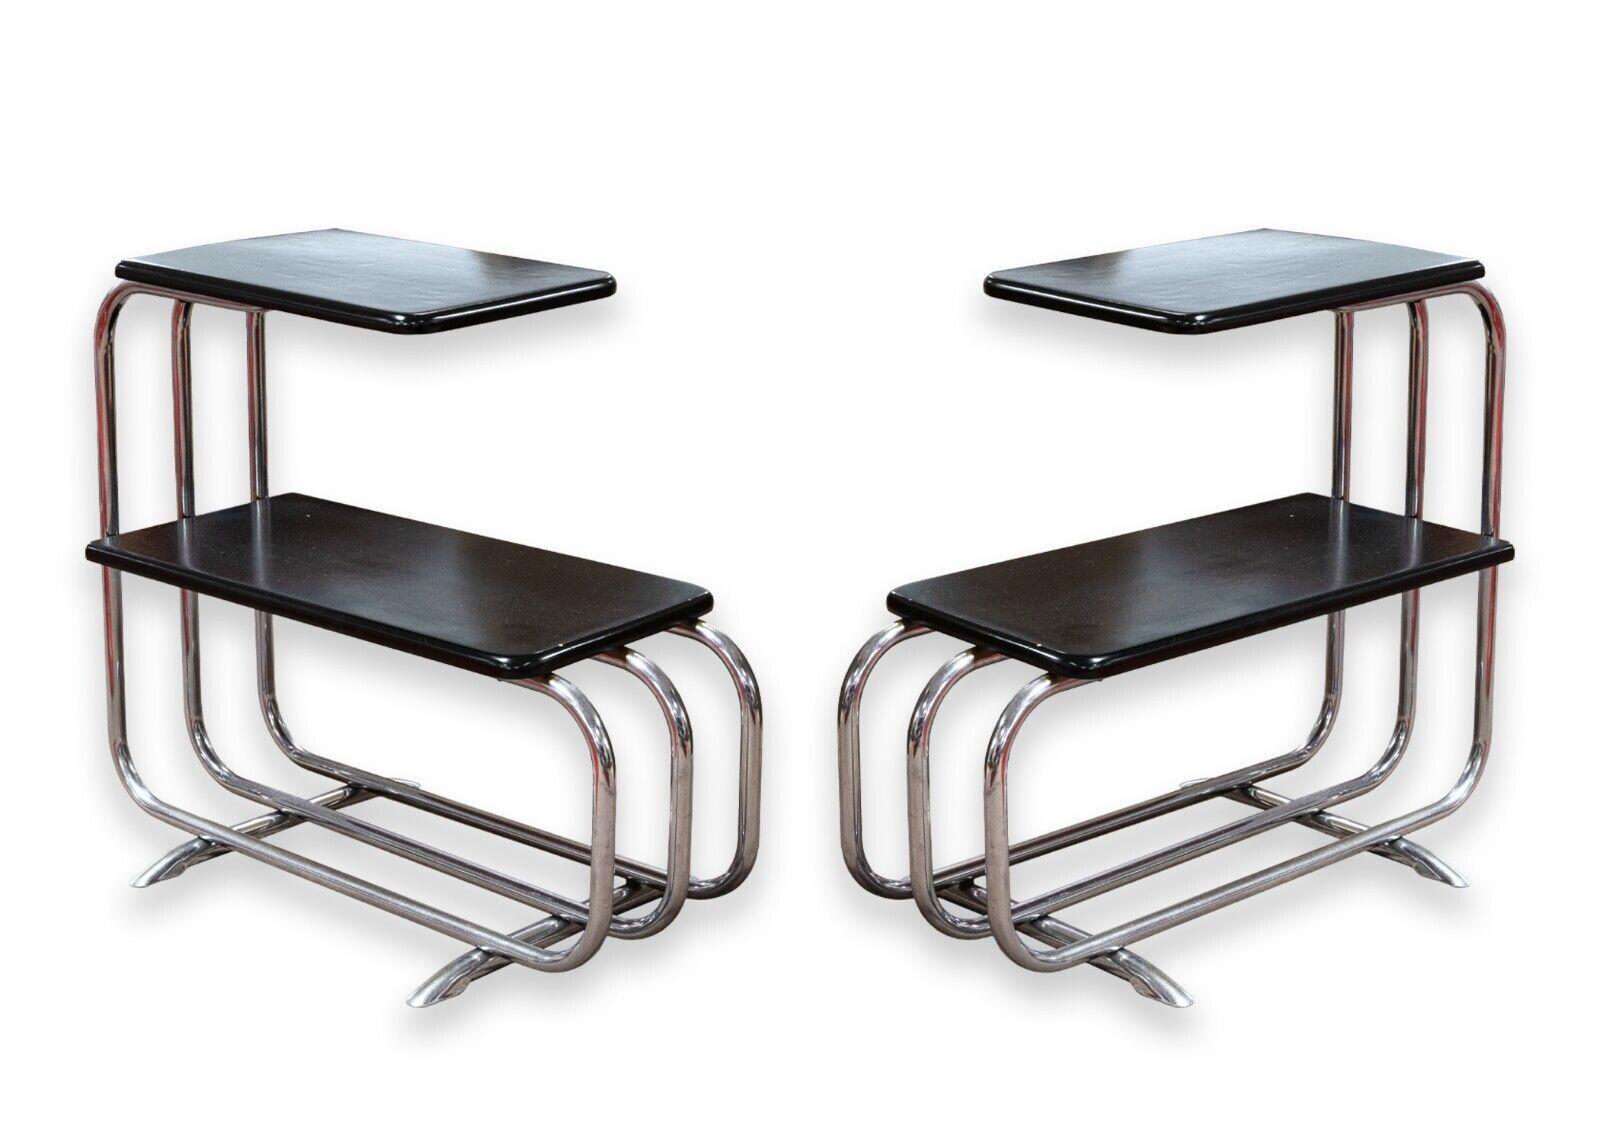 A pair of Alfons Bach for Lloyd Manufacturing Co side end tables. A truly stunning set of vintage art deco side end tables. These table feature a two tier design, white a tubular chrome frame, and black lacquered wood table tops. These tables were